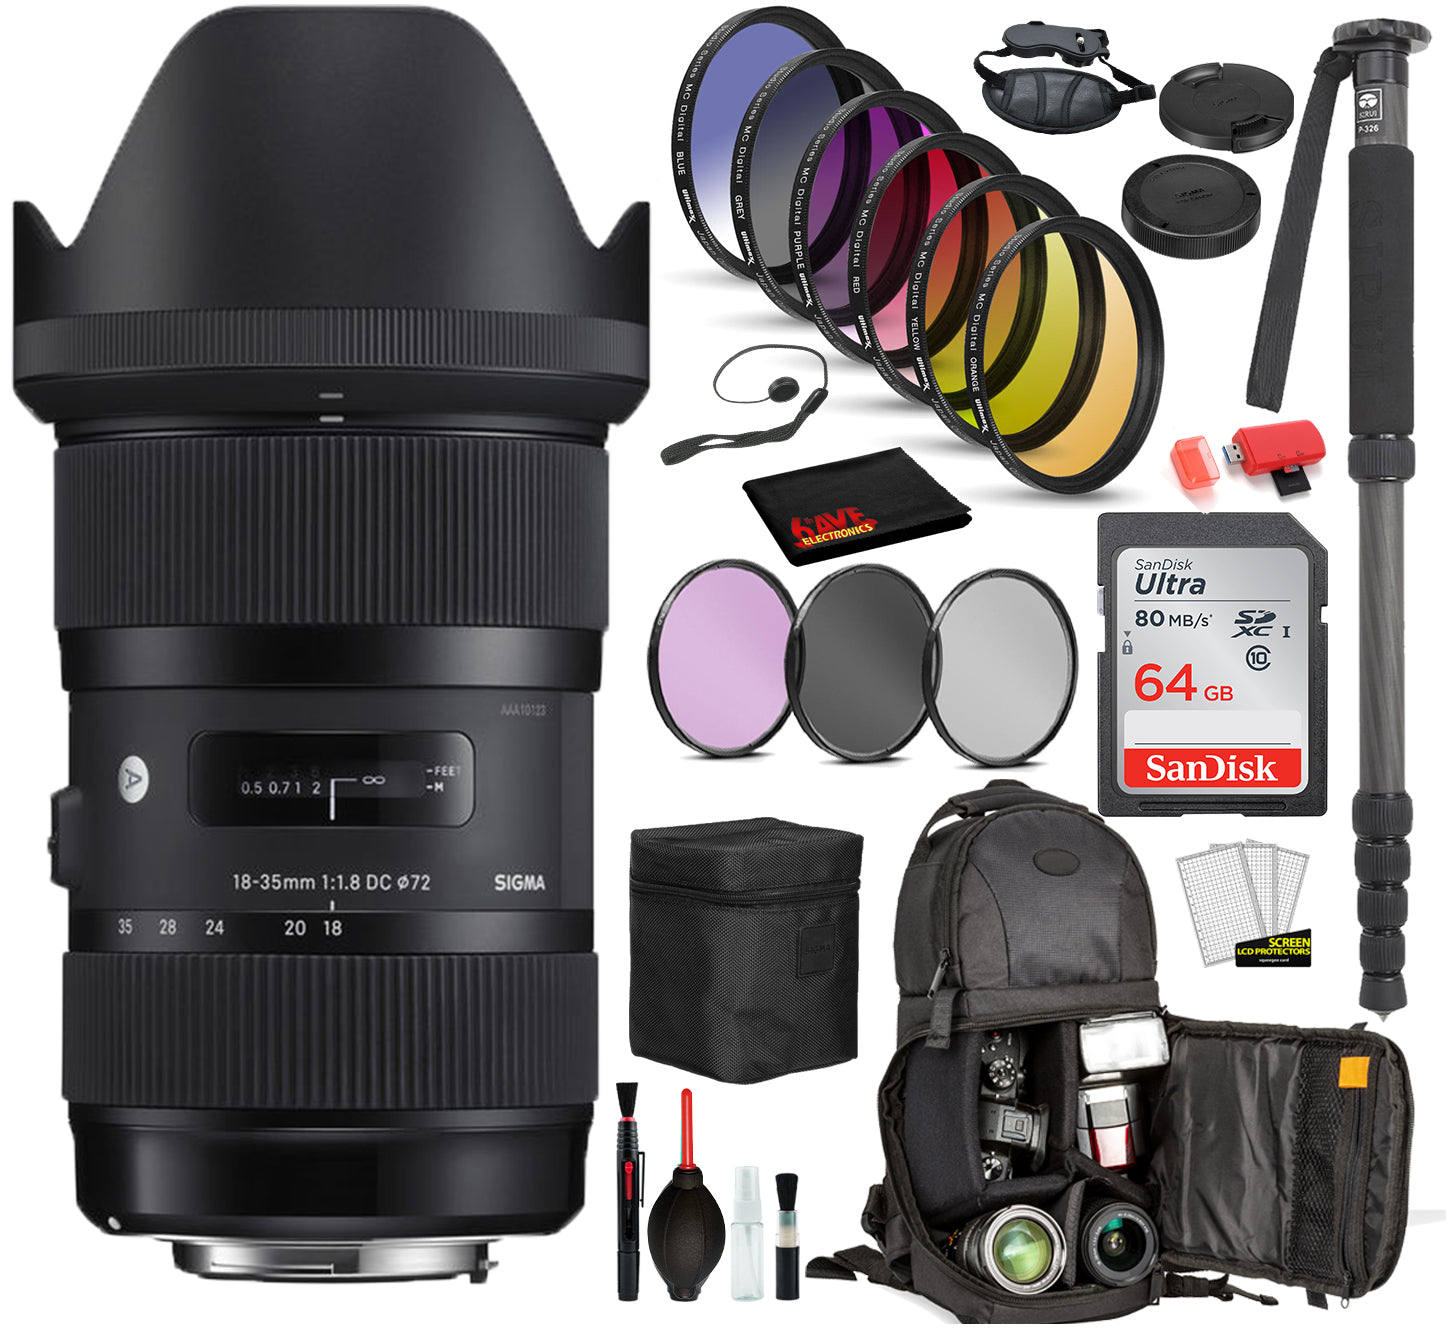 Sigma 18-35mm f/1.8 DC HSM Art Lens for Canon EF with Bundle Includes: Sandisk 64gb SD Card, 9PC Filter Kit + More